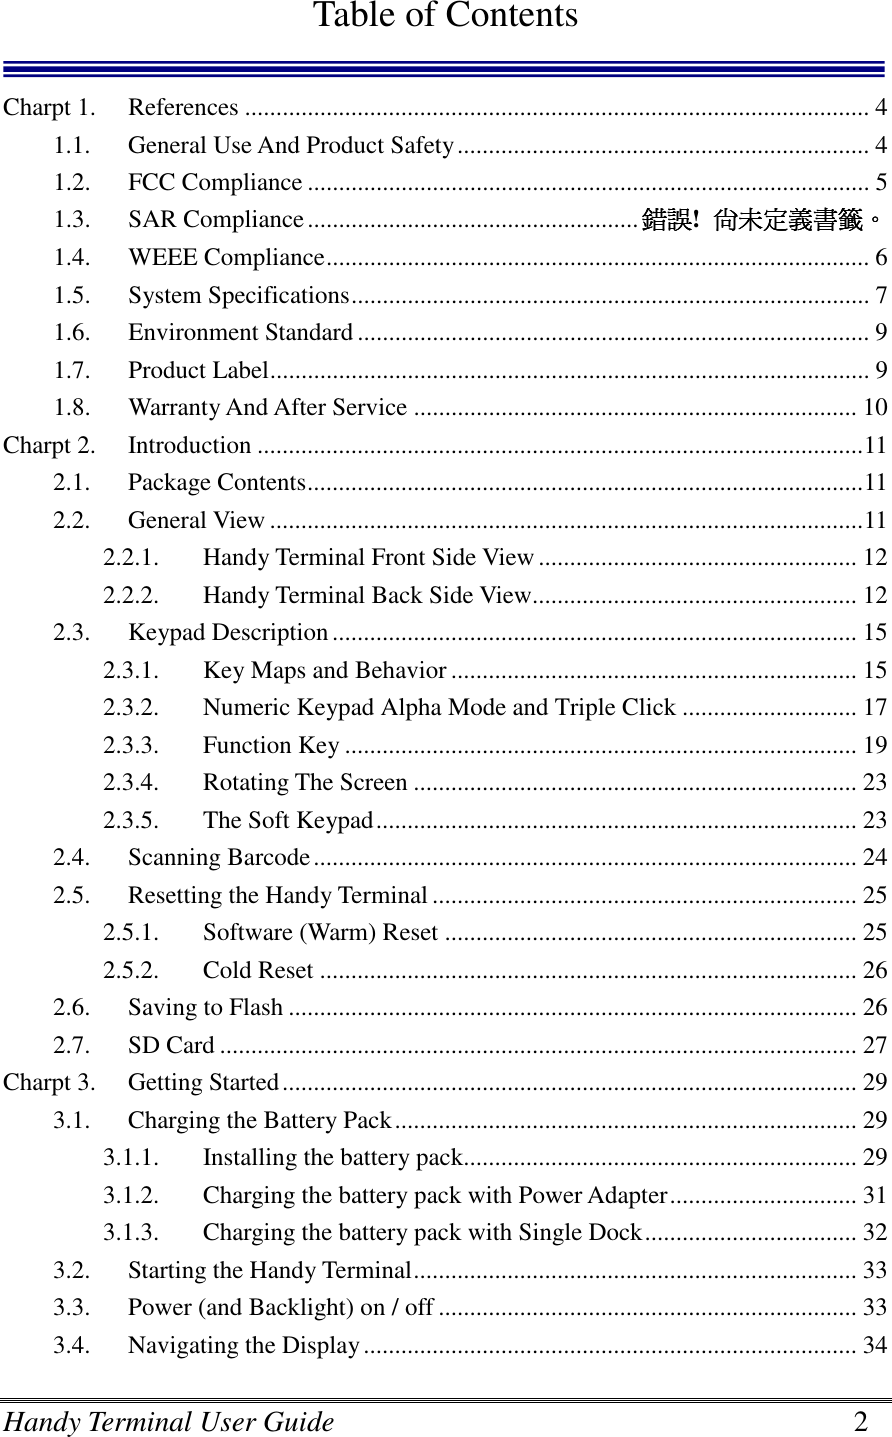 Handy Terminal User Guide      2  Table of Contents  Charpt 1.  References .................................................................................................... 4 1.1.  General Use And Product Safety.................................................................. 4 1.2.  FCC Compliance .......................................................................................... 5 1.3.  SAR Compliance..................................................... 錯誤錯誤錯誤錯誤!  尚未定義書籤尚未定義書籤尚未定義書籤尚未定義書籤。。。。 1.4.  WEEE Compliance....................................................................................... 6 1.5.  System Specifications................................................................................... 7 1.6.  Environment Standard .................................................................................. 9 1.7.  Product Label................................................................................................ 9 1.8.  Warranty And After Service ....................................................................... 10 Charpt 2.  Introduction .................................................................................................11 2.1.  Package Contents.........................................................................................11 2.2.  General View ...............................................................................................11 2.2.1.  Handy Terminal Front Side View ................................................... 12 2.2.2.  Handy Terminal Back Side View.................................................... 12 2.3.  Keypad Description.................................................................................... 15 2.3.1.  Key Maps and Behavior ................................................................. 15 2.3.2.  Numeric Keypad Alpha Mode and Triple Click ............................ 17 2.3.3.  Function Key .................................................................................. 19 2.3.4.  Rotating The Screen ....................................................................... 23 2.3.5.  The Soft Keypad............................................................................. 23 2.4.  Scanning Barcode....................................................................................... 24 2.5.  Resetting the Handy Terminal .................................................................... 25 2.5.1.  Software (Warm) Reset .................................................................. 25 2.5.2.  Cold Reset ...................................................................................... 26 2.6.  Saving to Flash ........................................................................................... 26 2.7.  SD Card ...................................................................................................... 27 Charpt 3.  Getting Started............................................................................................ 29 3.1.  Charging the Battery Pack.......................................................................... 29 3.1.1.  Installing the battery pack............................................................... 29 3.1.2.  Charging the battery pack with Power Adapter.............................. 31 3.1.3.  Charging the battery pack with Single Dock.................................. 32 3.2.  Starting the Handy Terminal....................................................................... 33 3.3.  Power (and Backlight) on / off ................................................................... 33 3.4.  Navigating the Display............................................................................... 34 